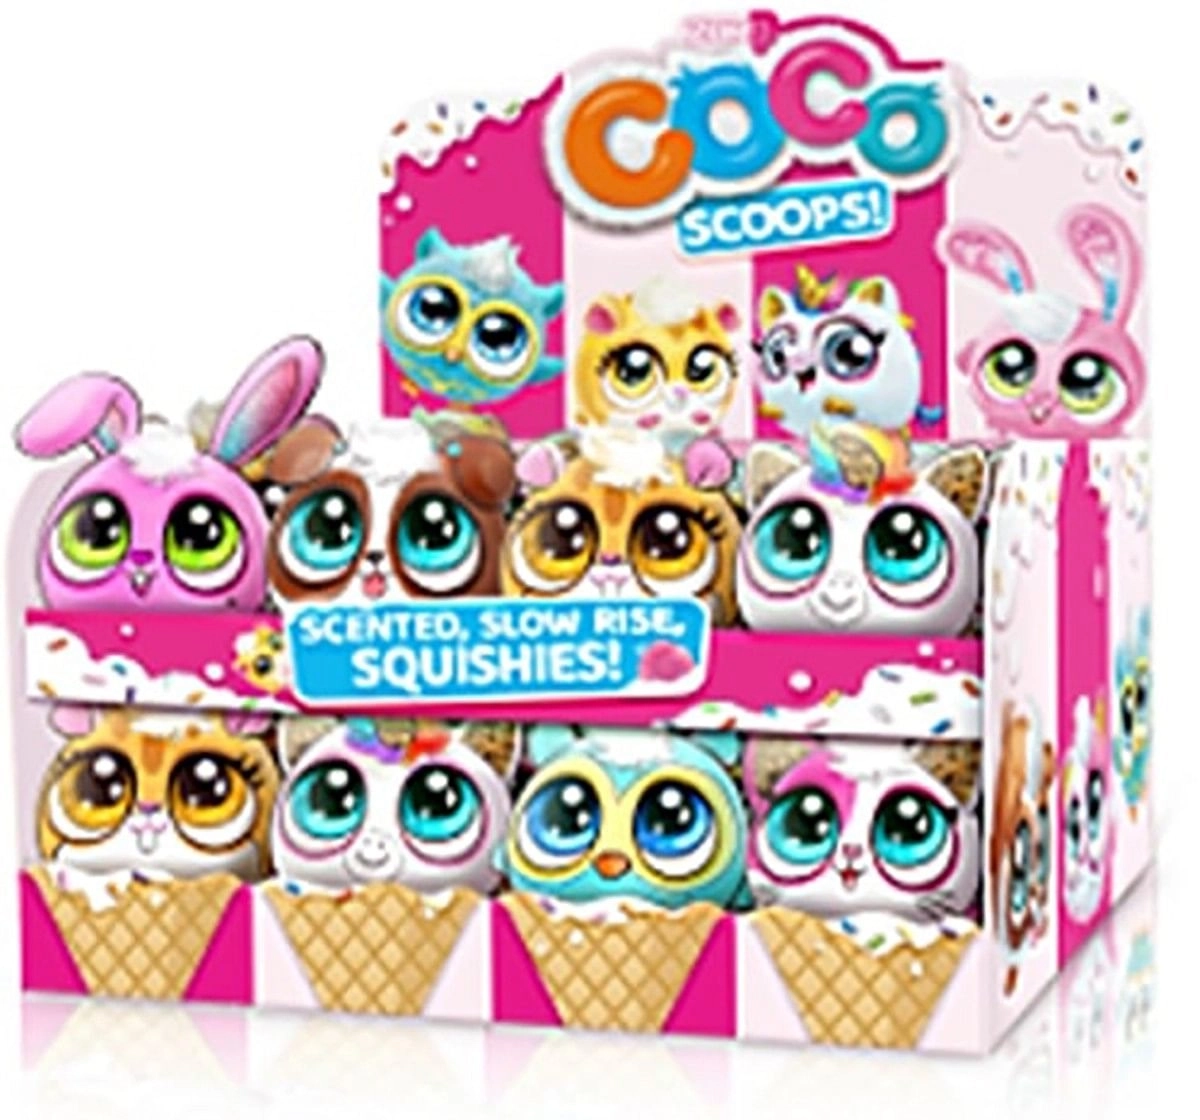 Coco Scoops Series 1 - Assorted Novelty for Kids age 3Y+ - 9 Cm 